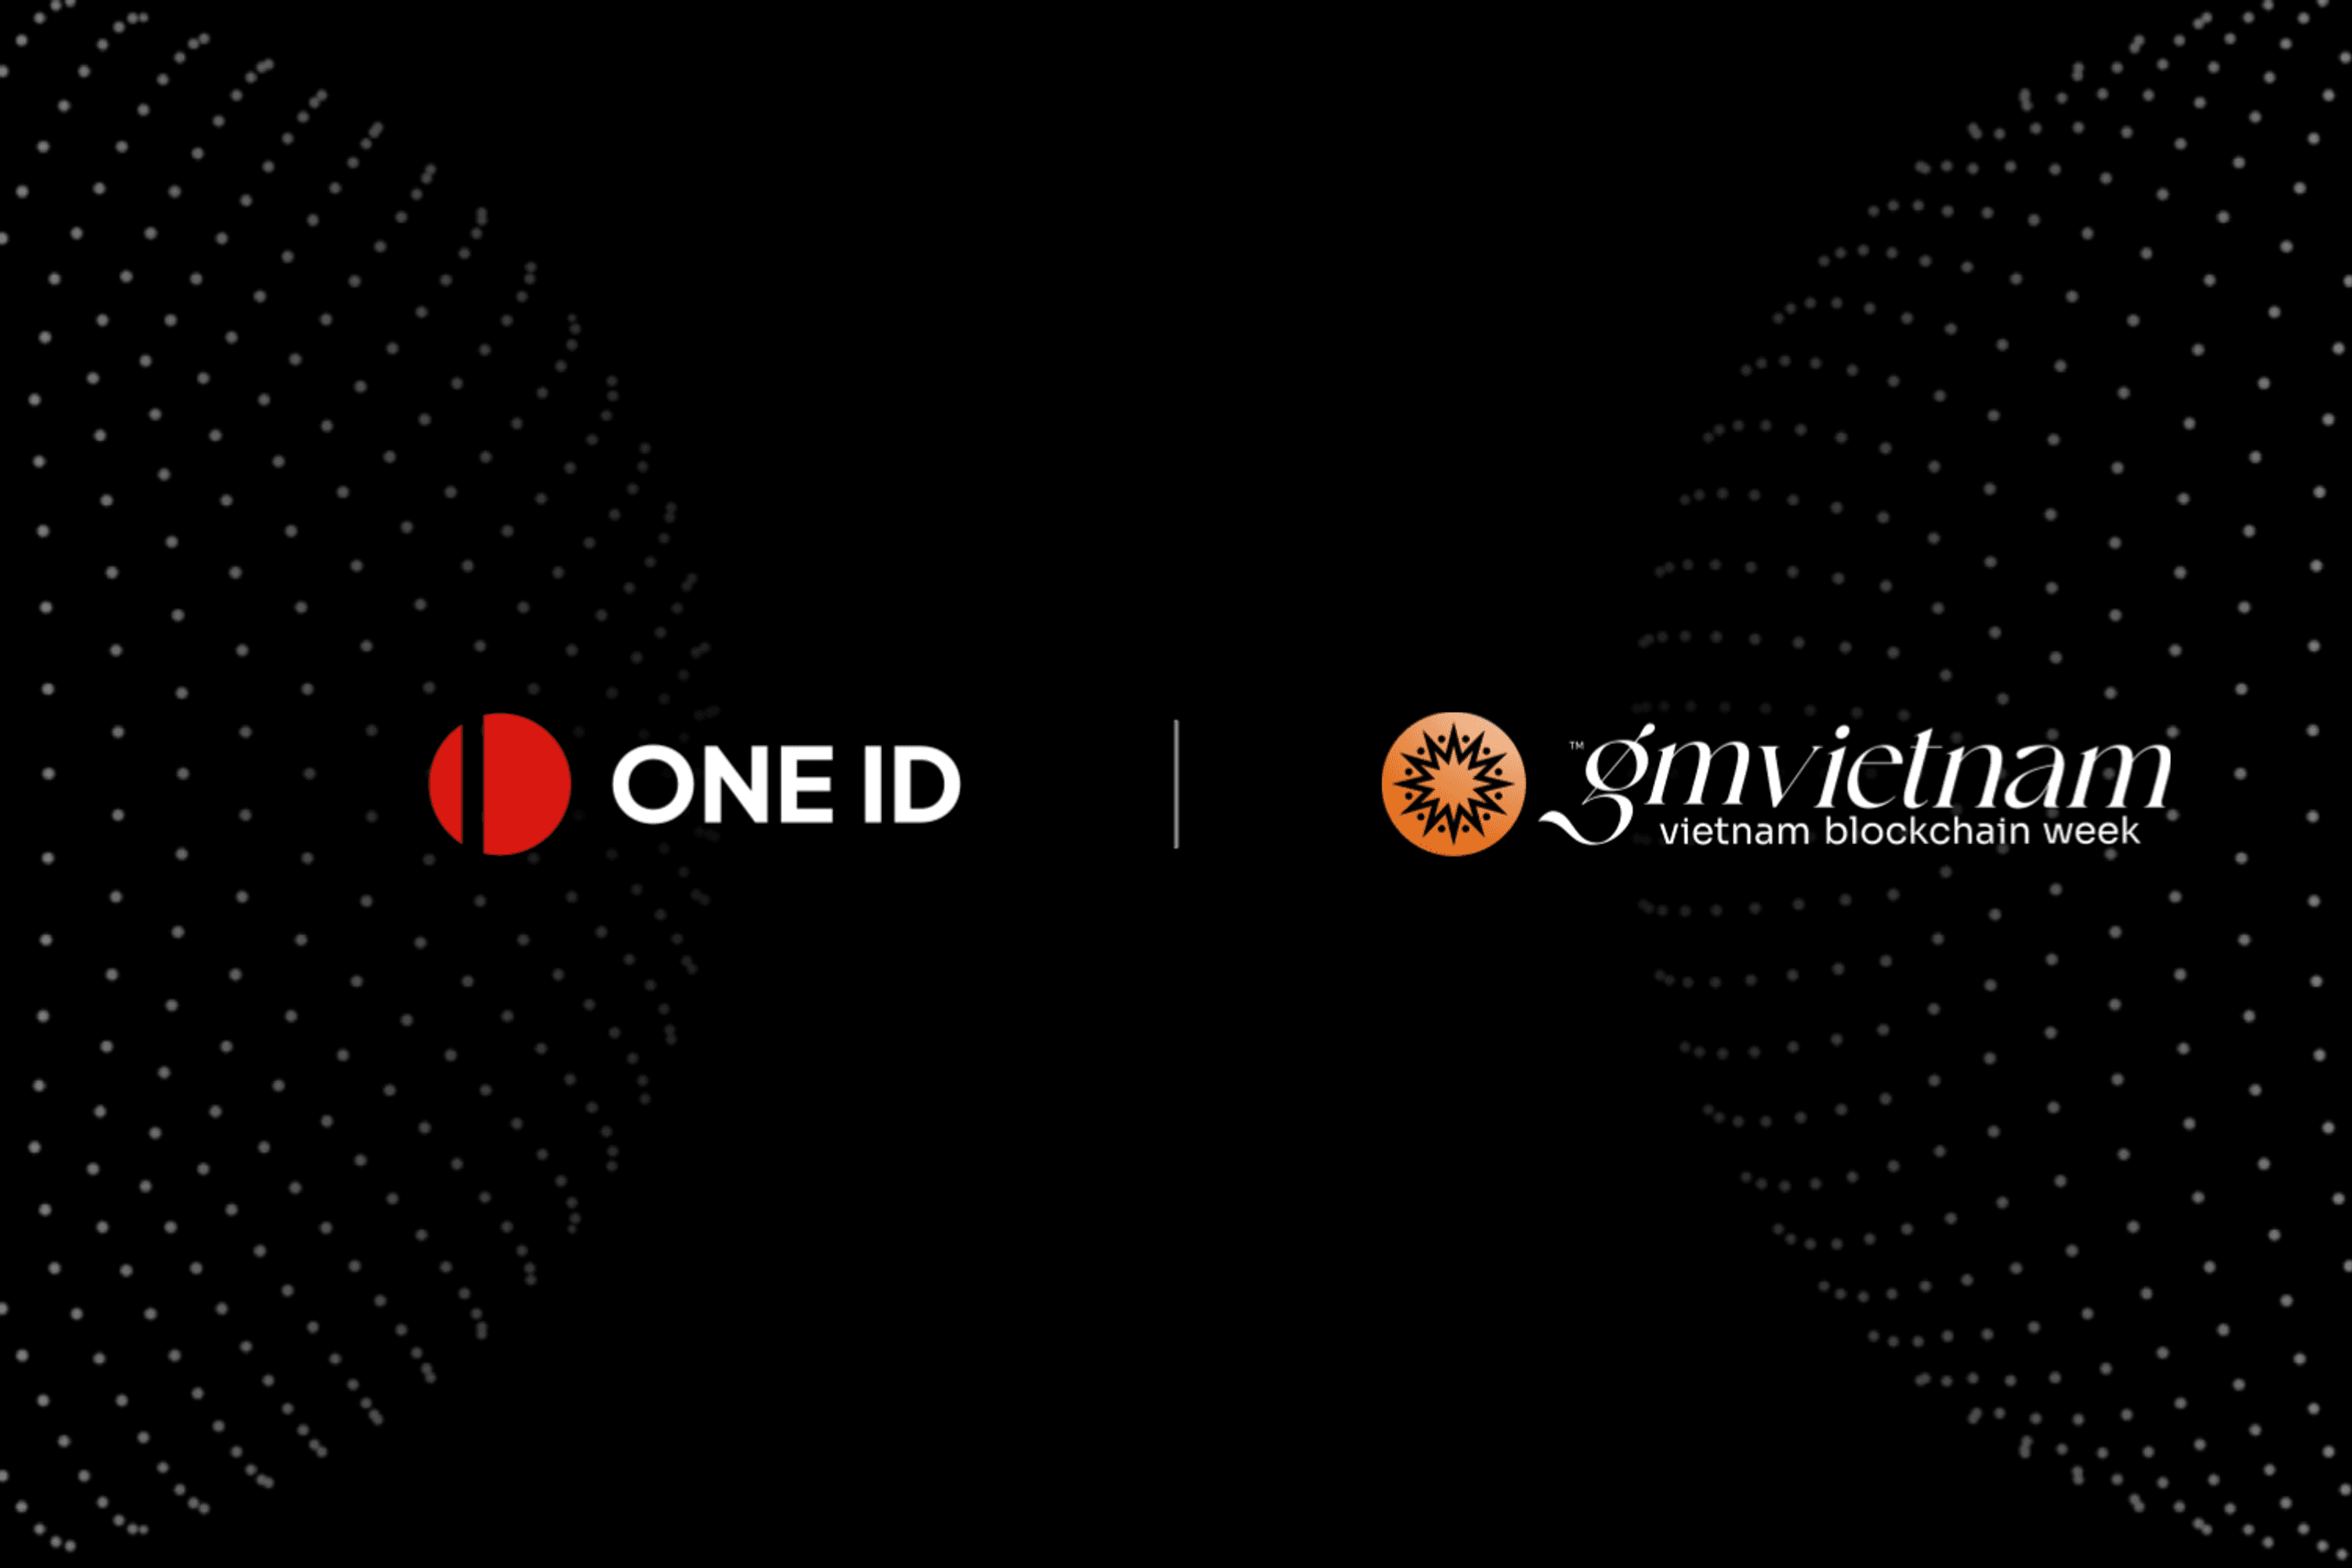 OneID & GM Vietnam: Your Unique “.gmvn” Identity For The Future Together We Create